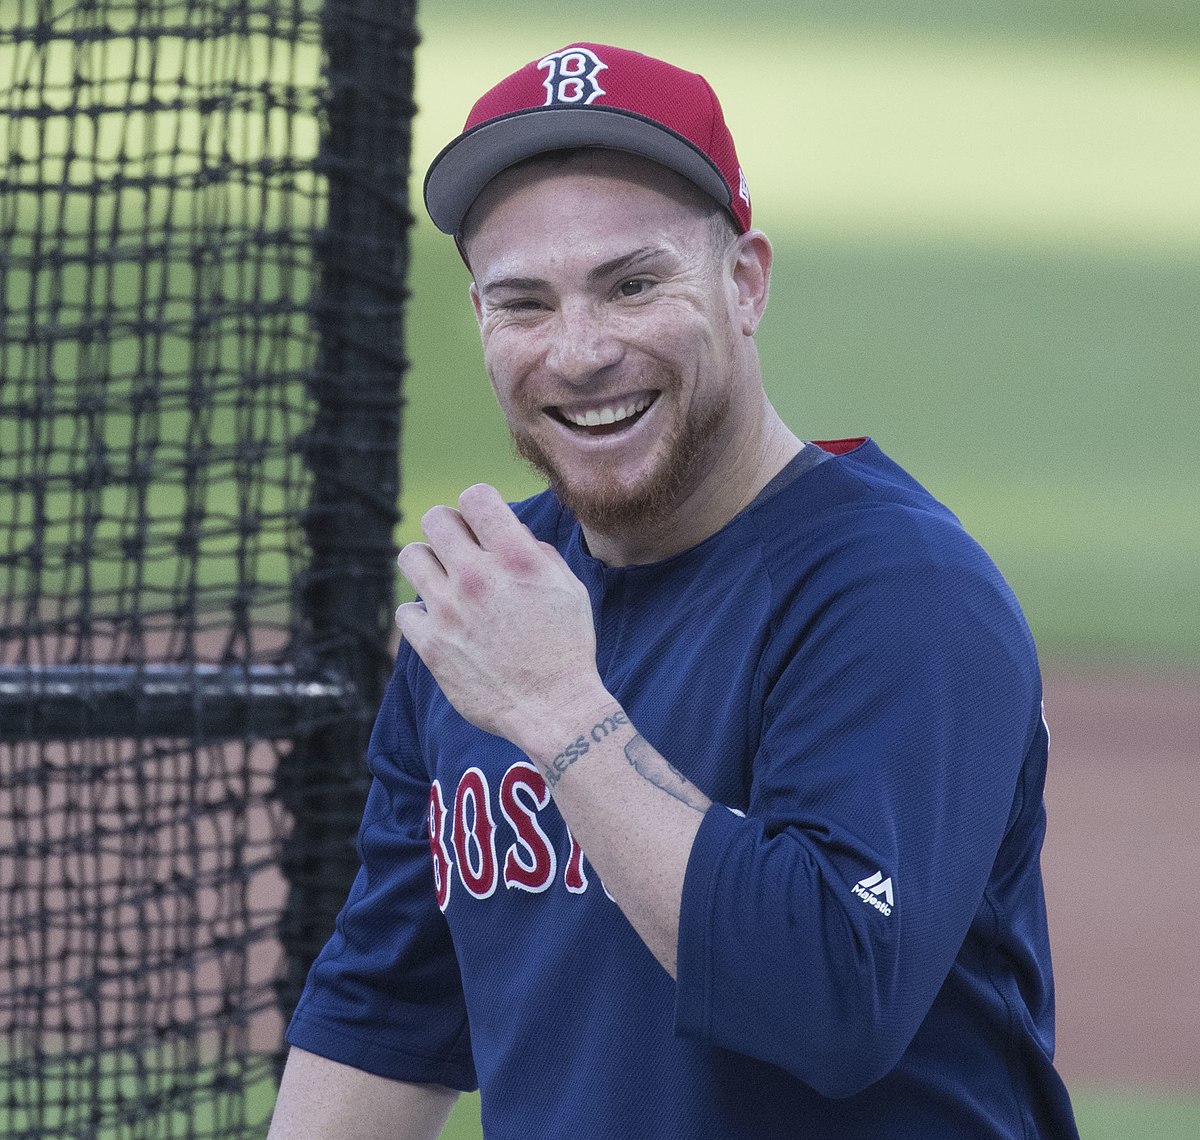 Christian Vázquez - MLB Catcher - News, Stats, Bio and more - The Athletic